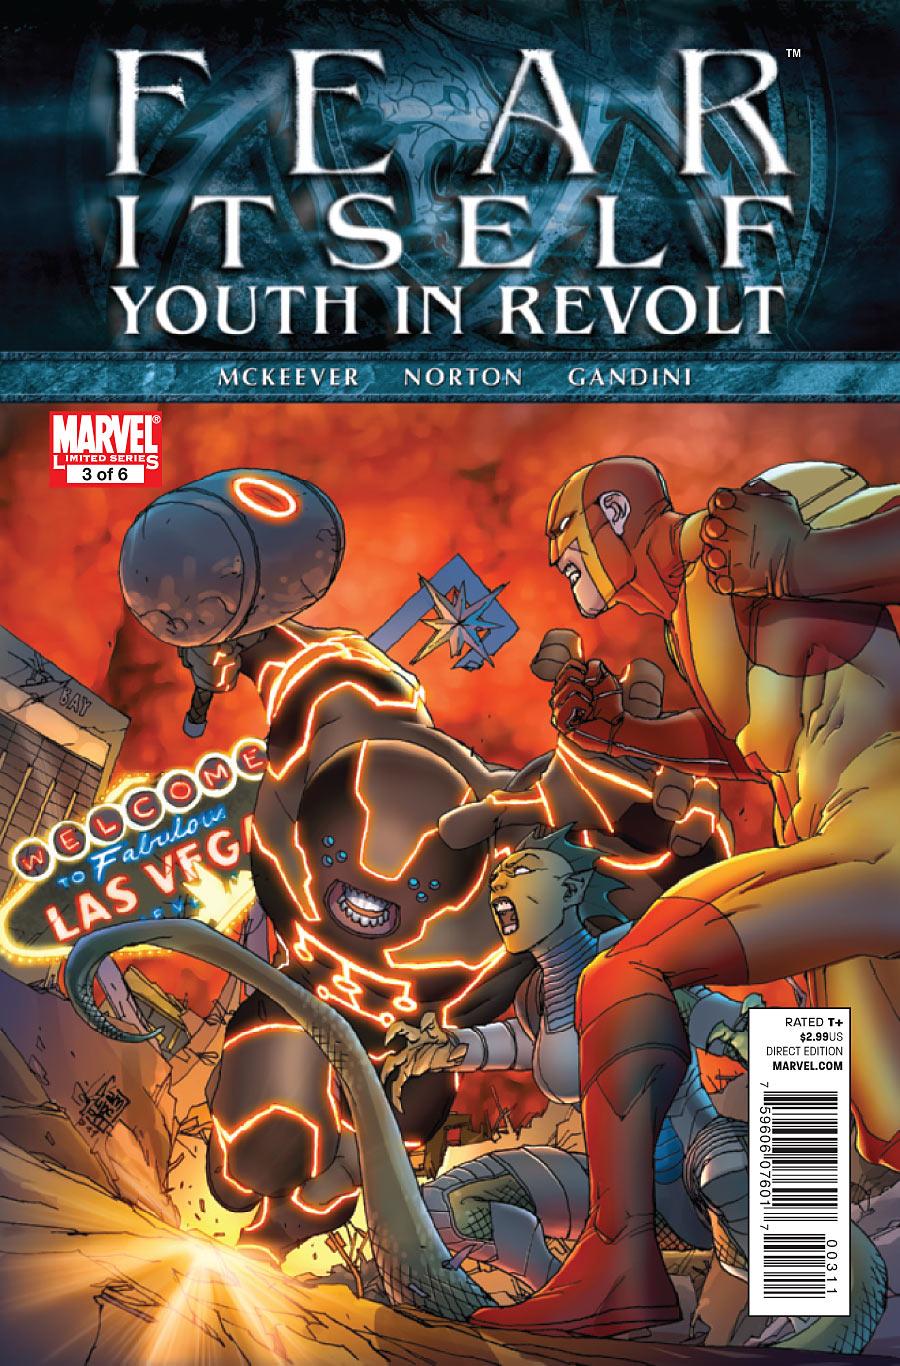 Fear Itself: Youth in Revolt Vol. 1 #3